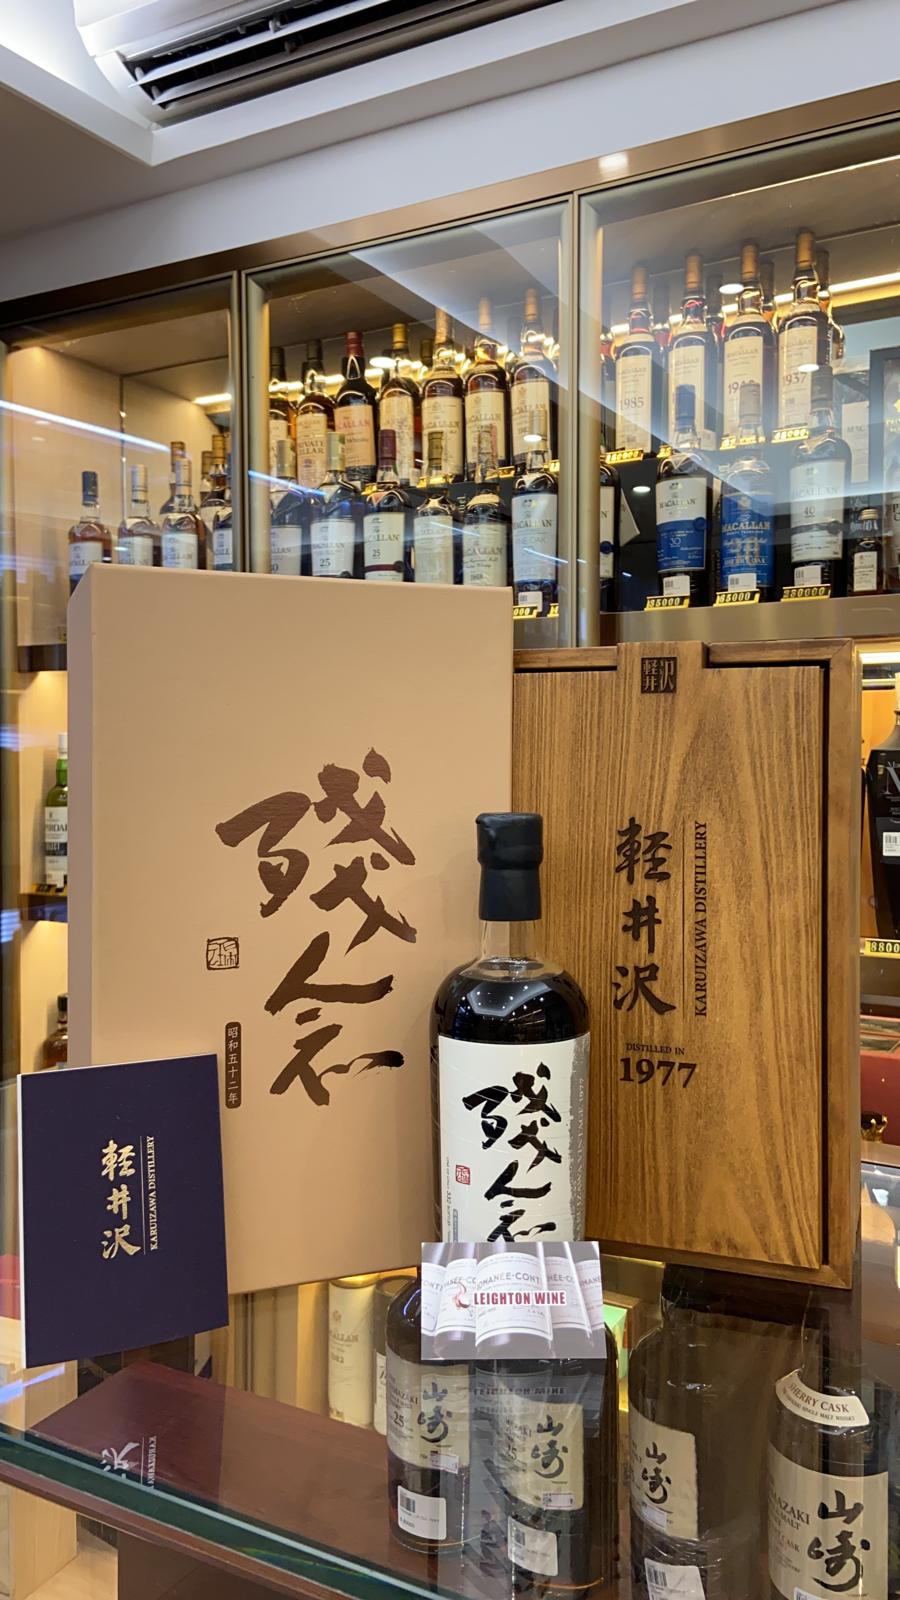 Karuizawa 40 Years Old 1977 (Exclusively Released for Kinlonz 1492 Cigars and Whisky)